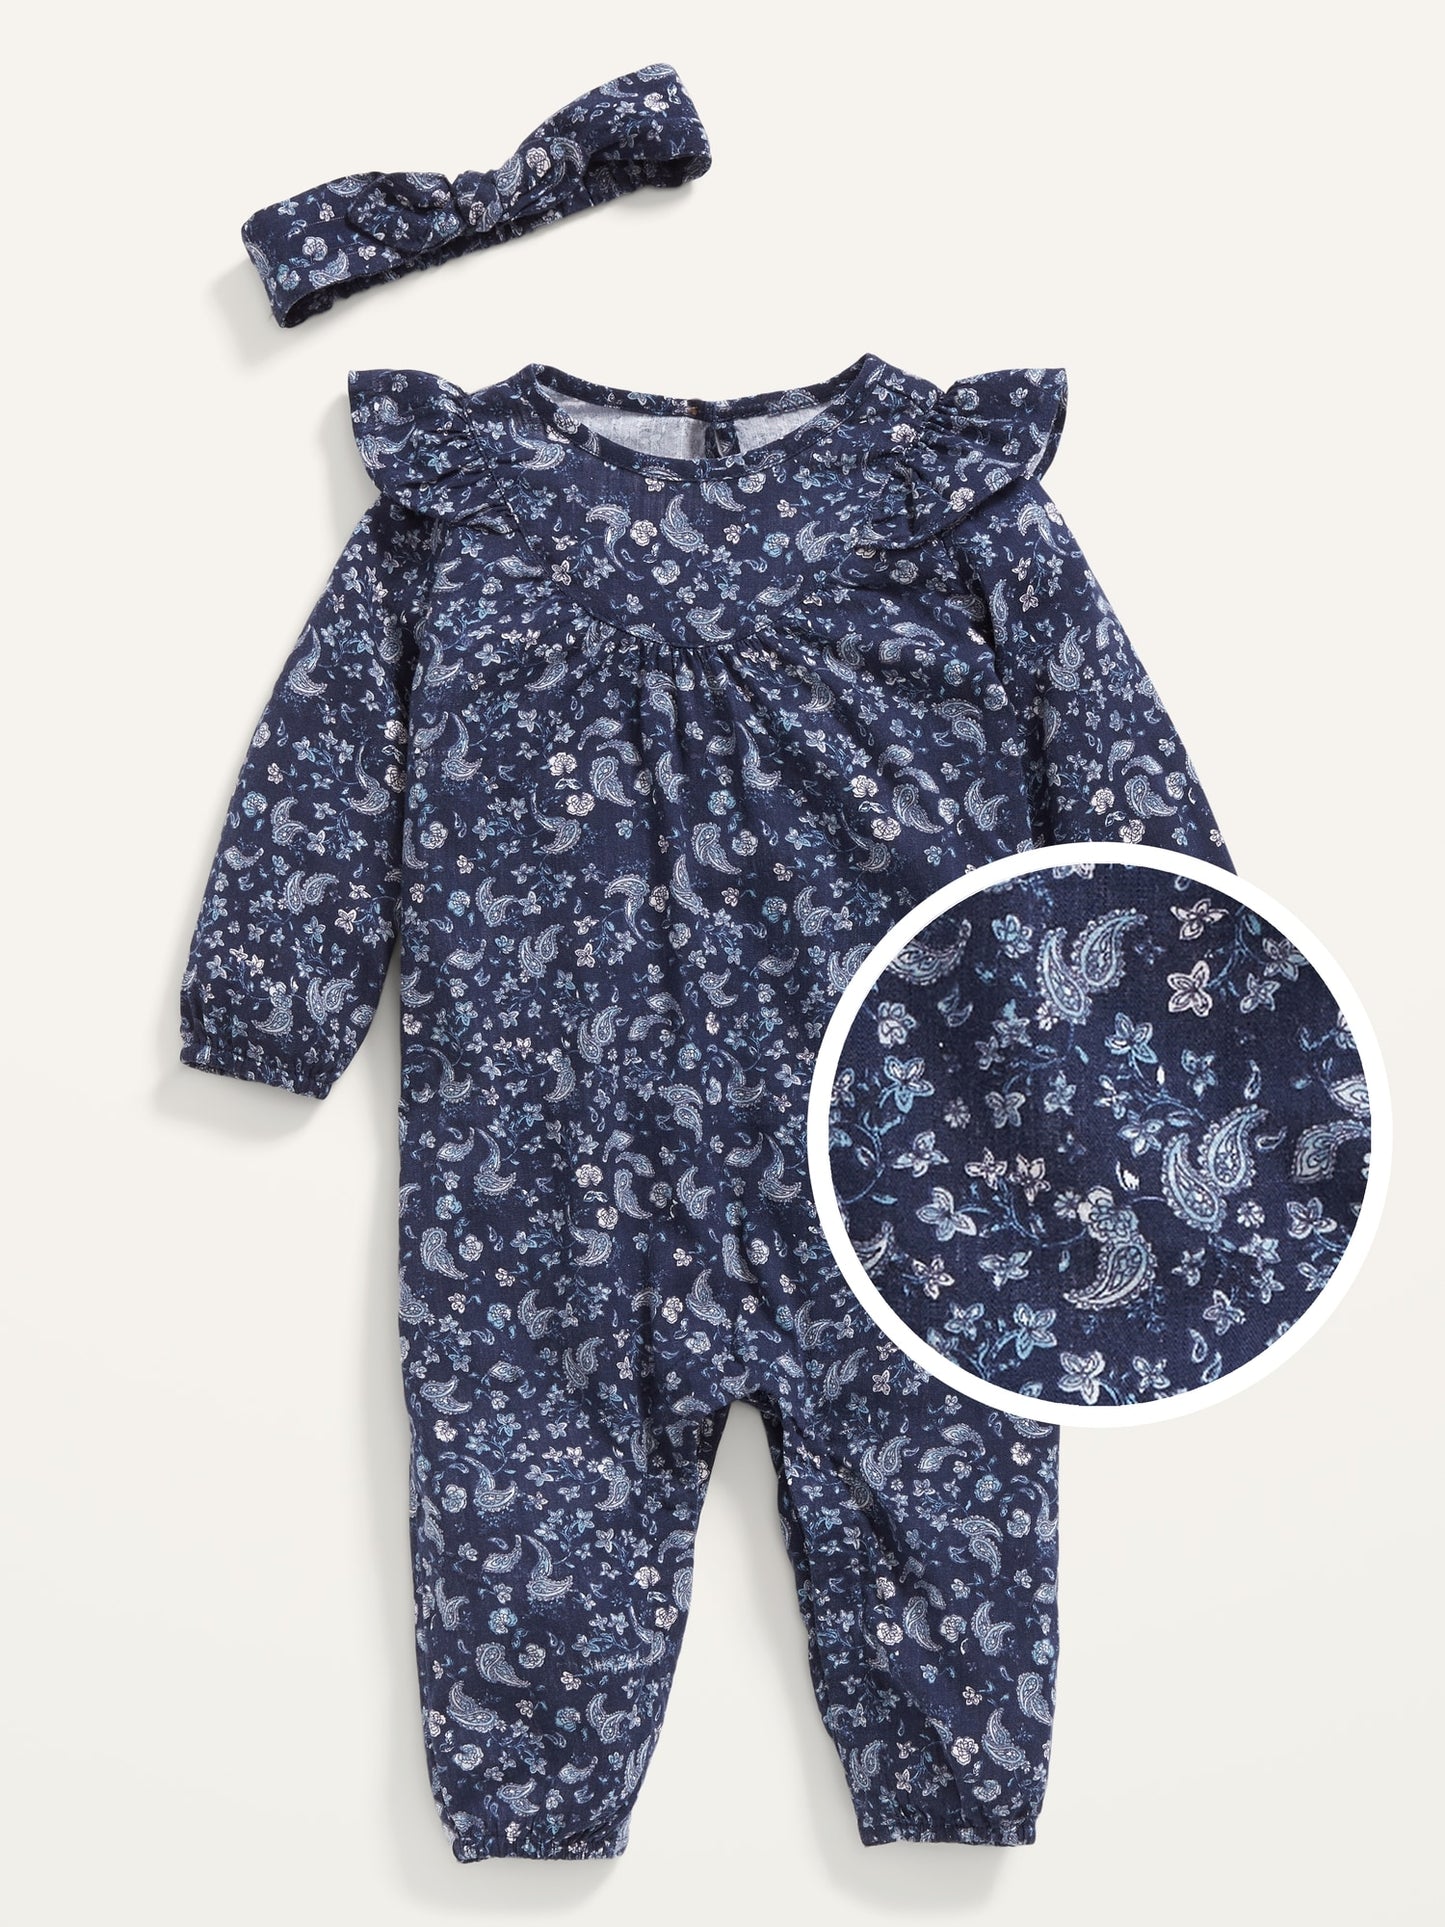 ON Long-Sleeve Floral One-Piece And Headband Set For Baby - Blue Ditsy Floral